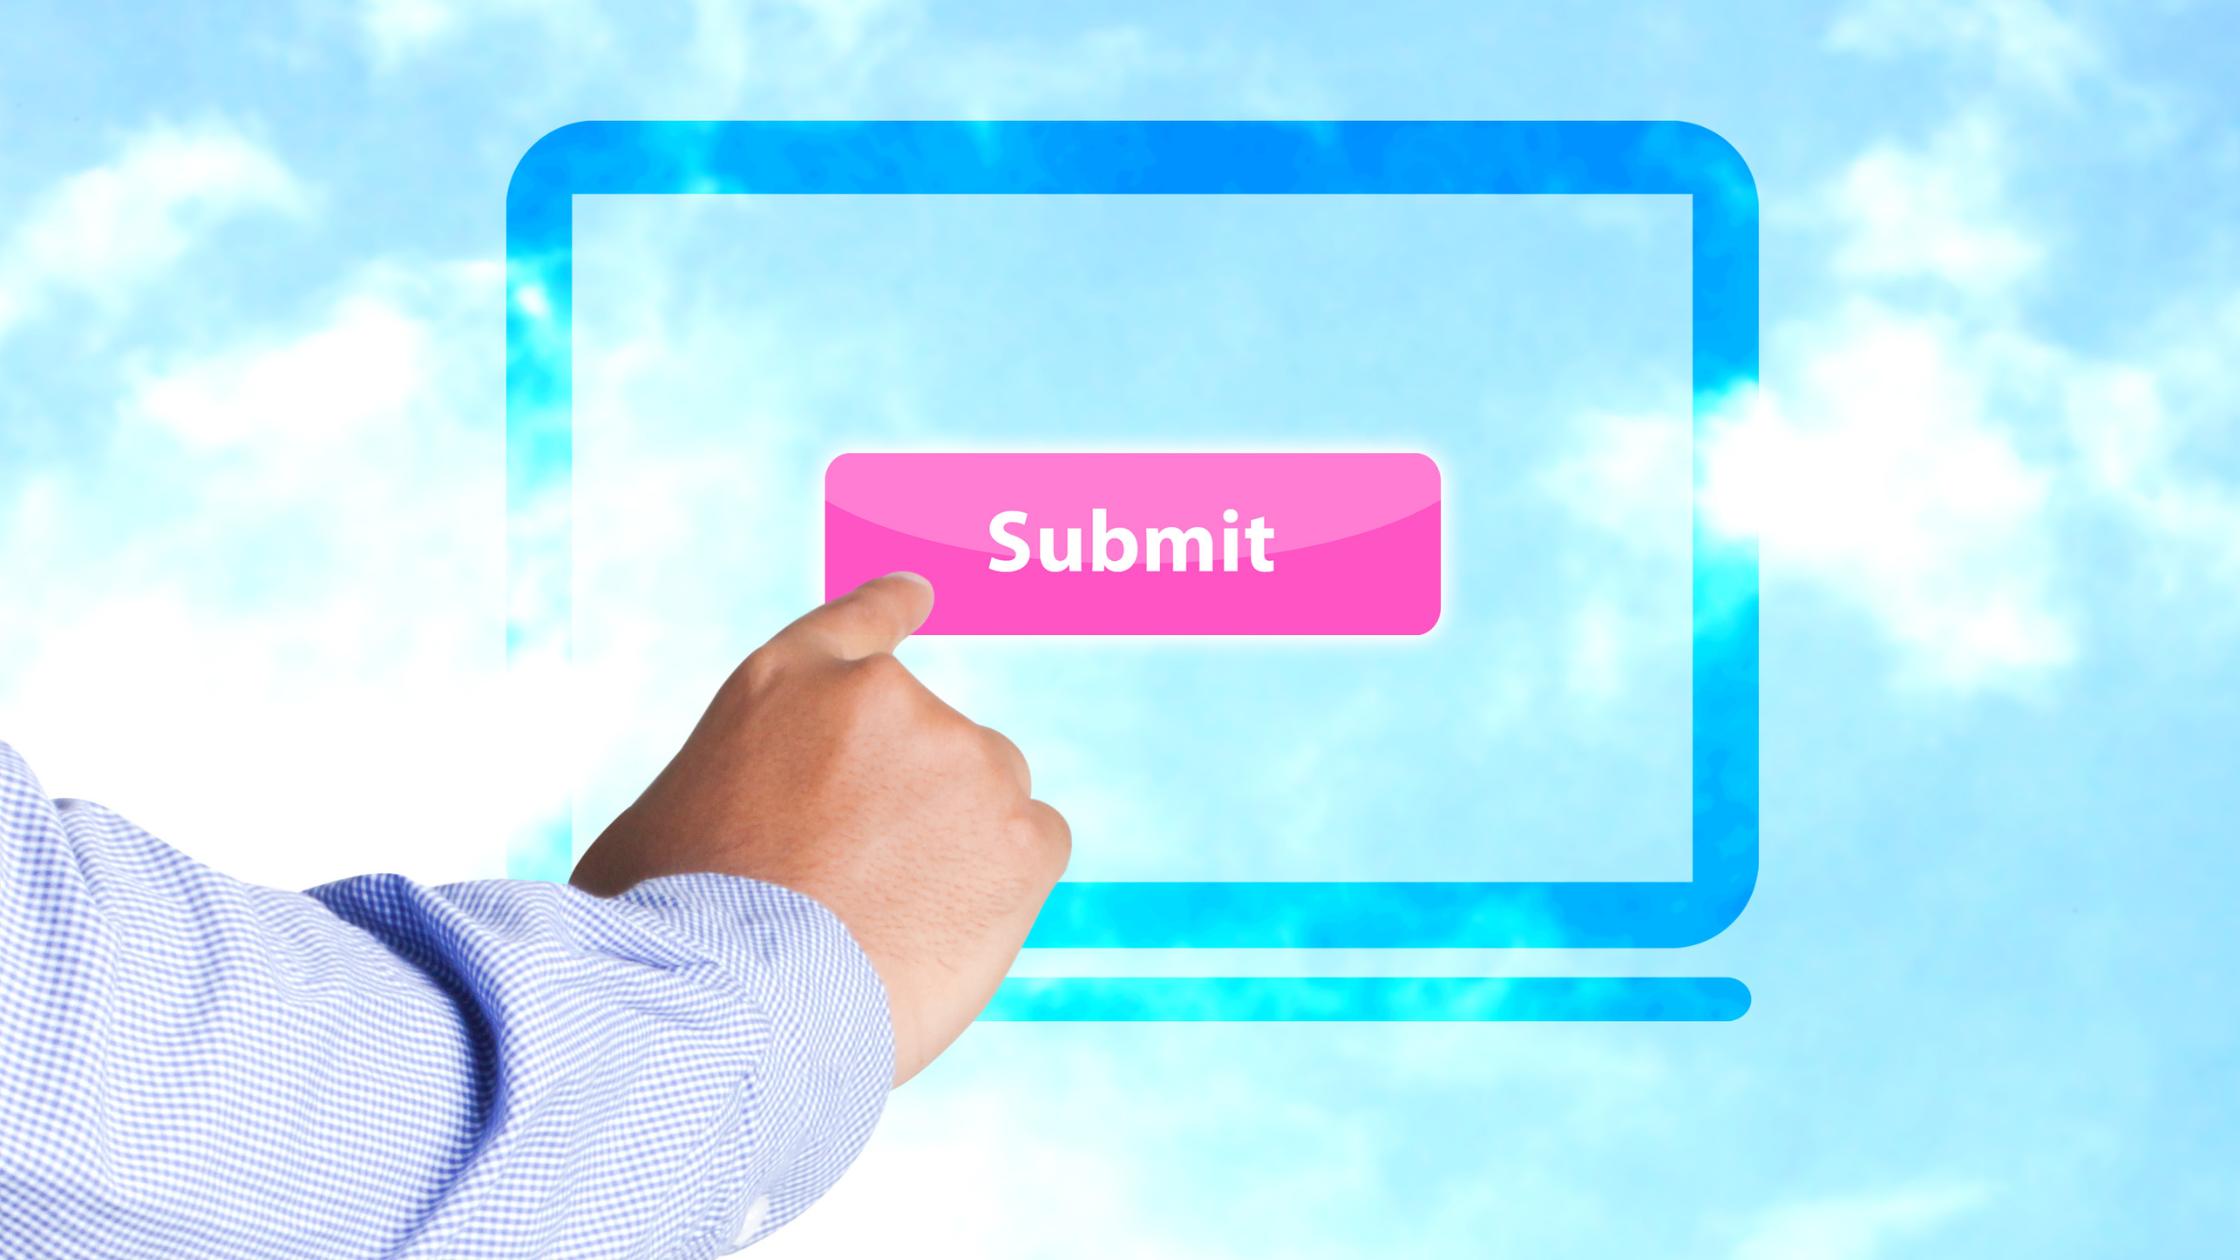 a person's finder tapping a pink submit button inside the outline of a computer against a blue sky with clouds